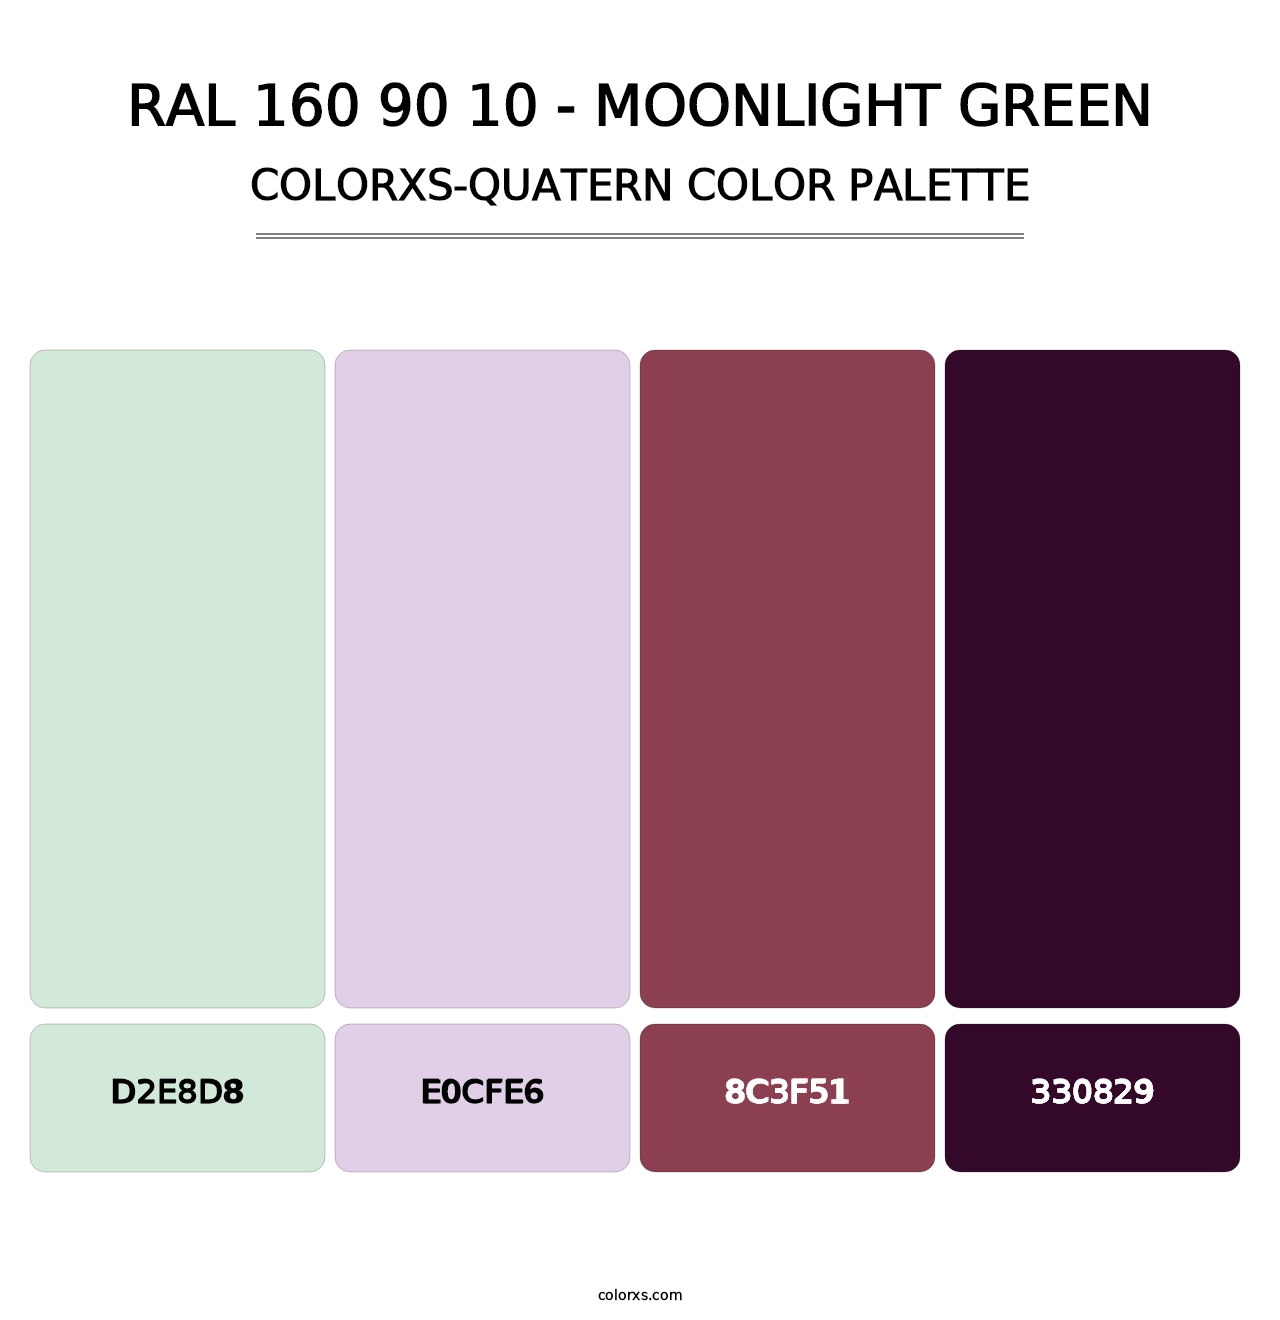 RAL 160 90 10 - Moonlight Green - Colorxs Quatern Palette